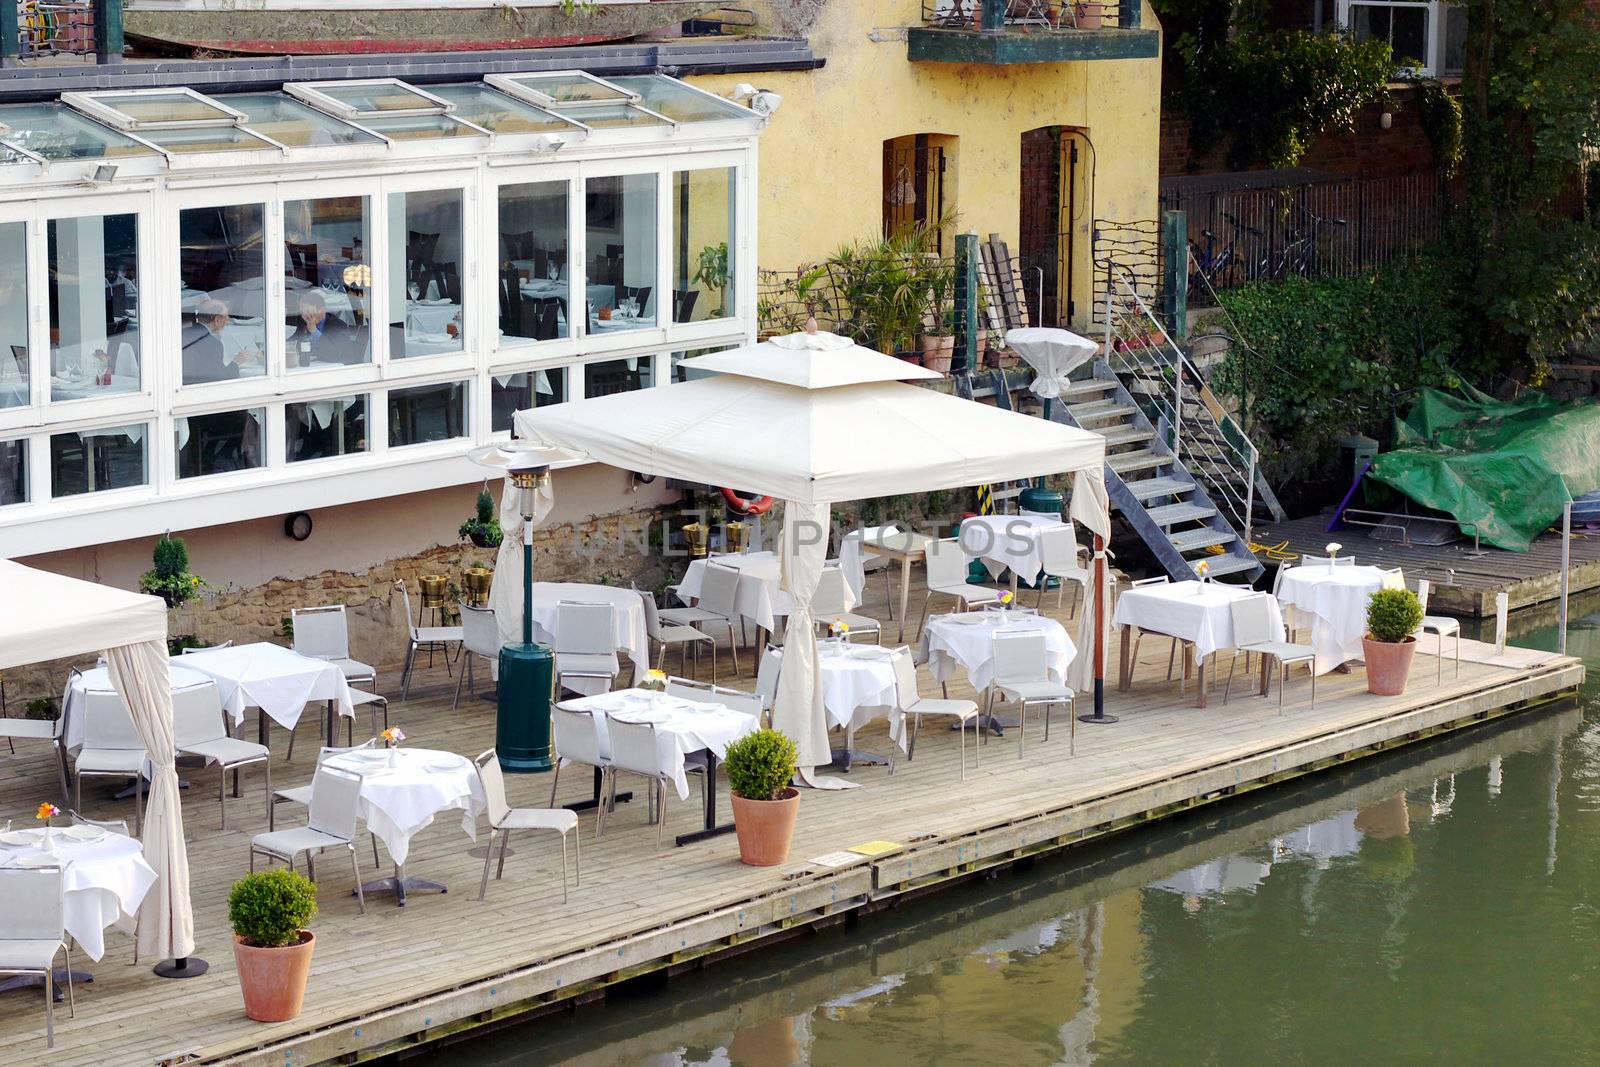 Al fresco dining at the river Thames in Oxford, UK.